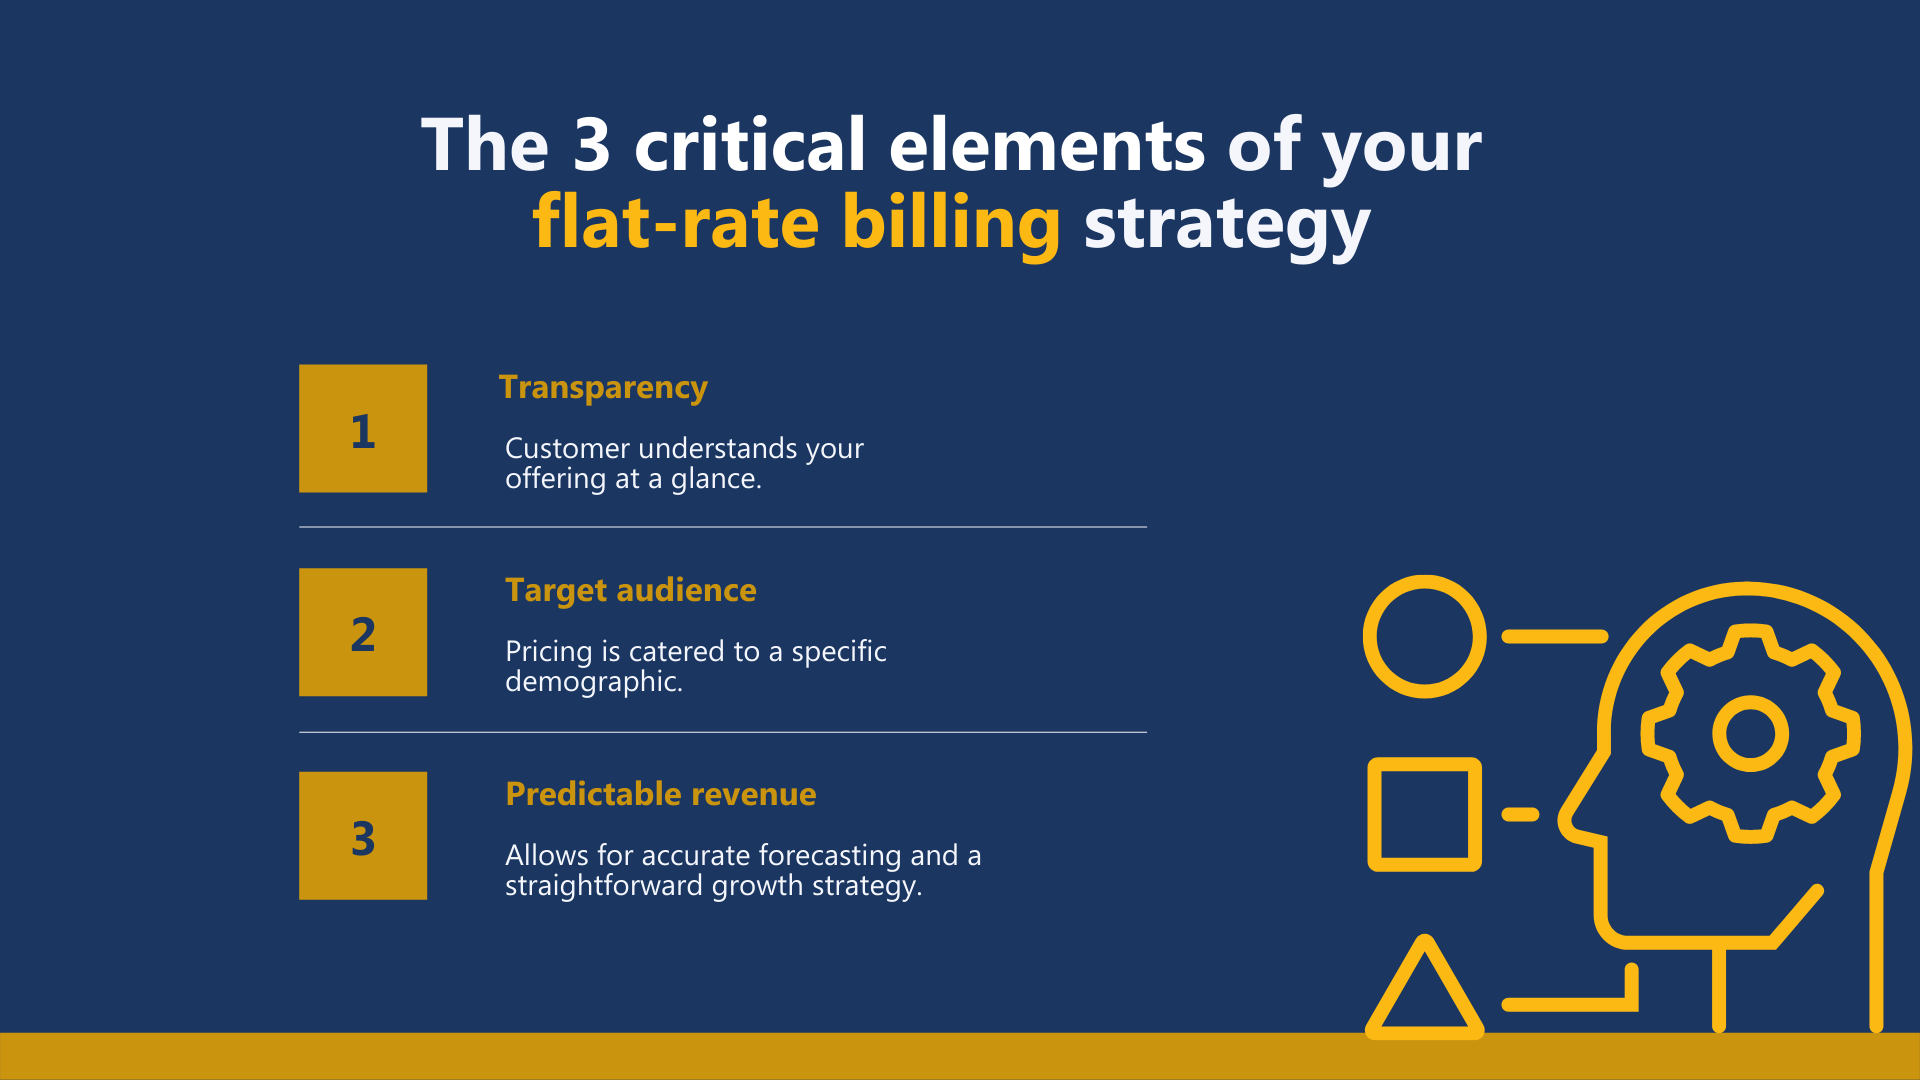 Three critical elements of your flat-rate billing strategy